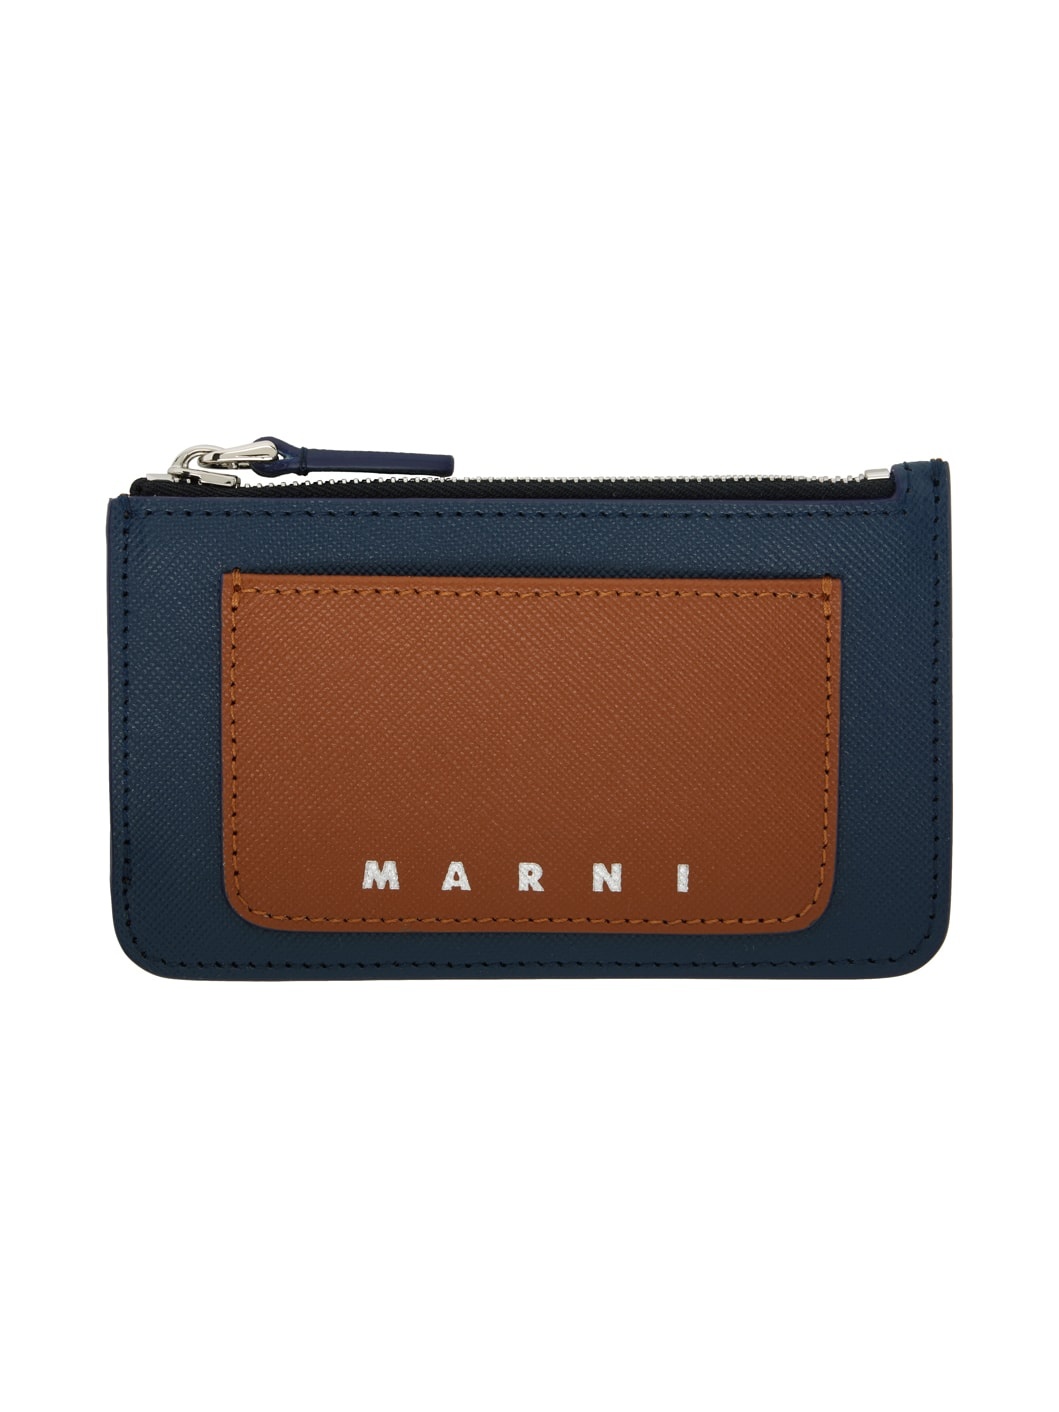 Navy & Brown Saffiano Leather Card Holder - 1